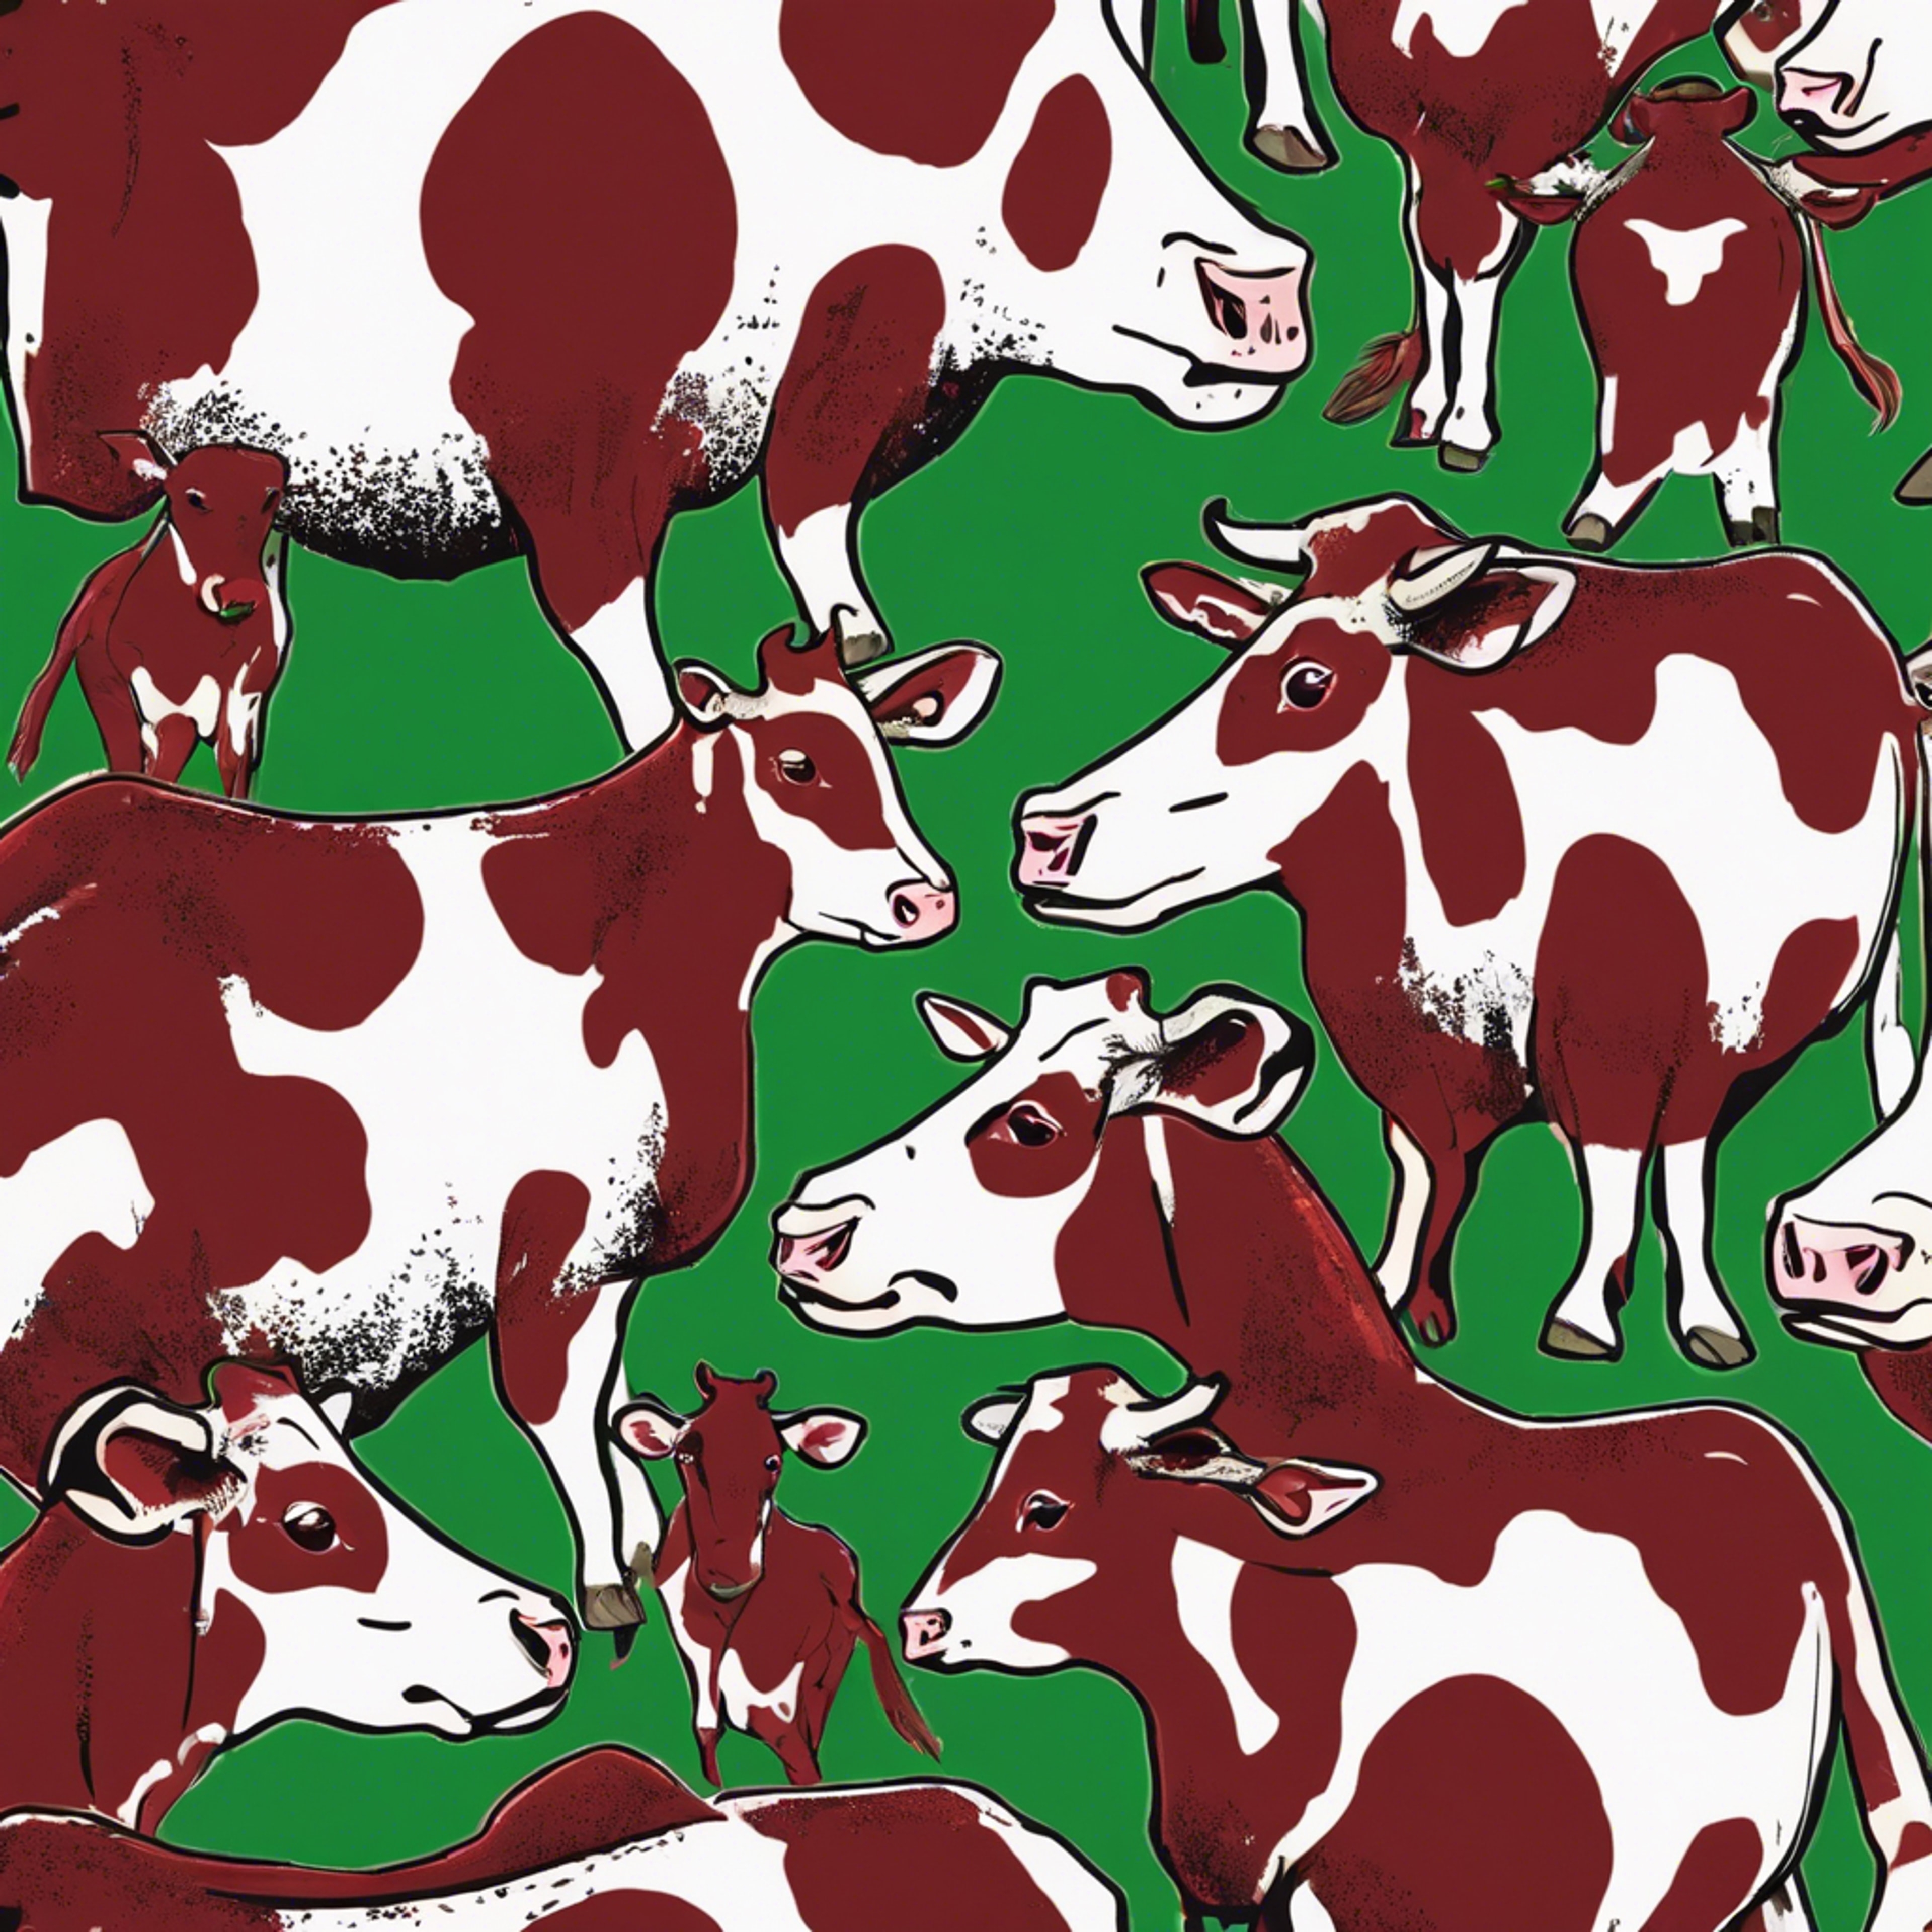 Cow spots in a mixed arrangement of rich red and fresh green. Hình nền[f1cd1f055c9d420f9ac5]